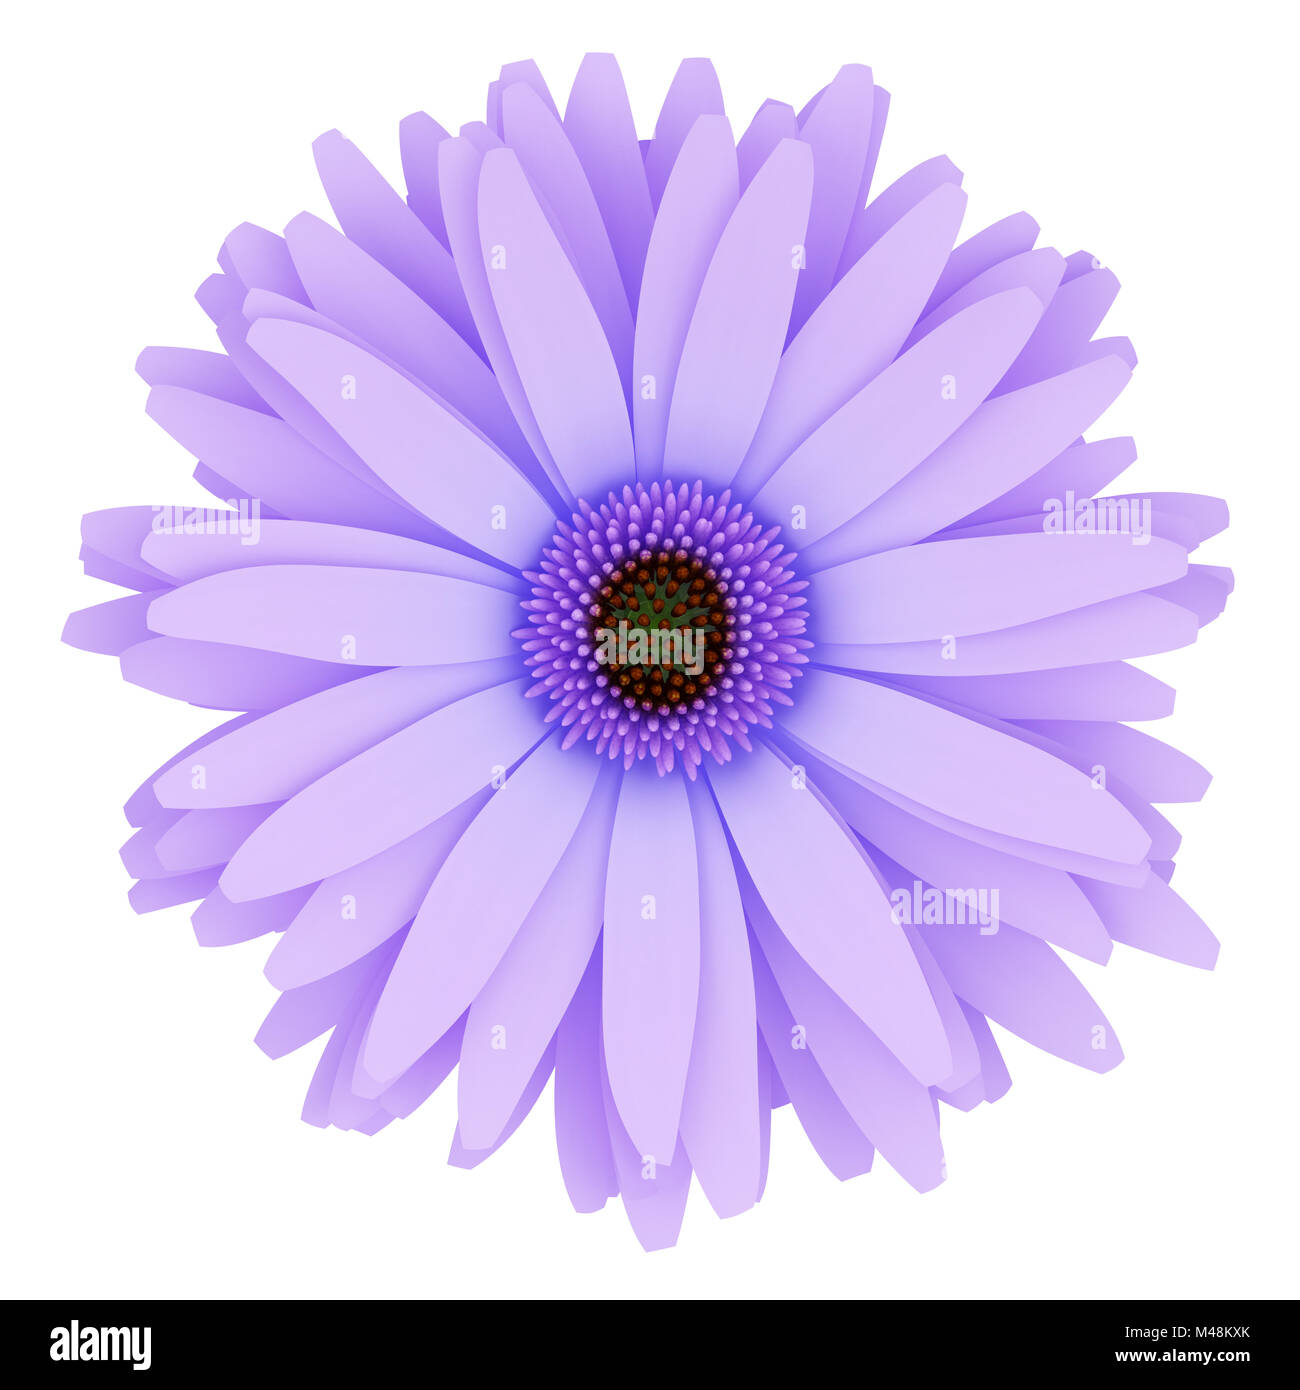 top view of purple flower isolated on white background Stock Photo